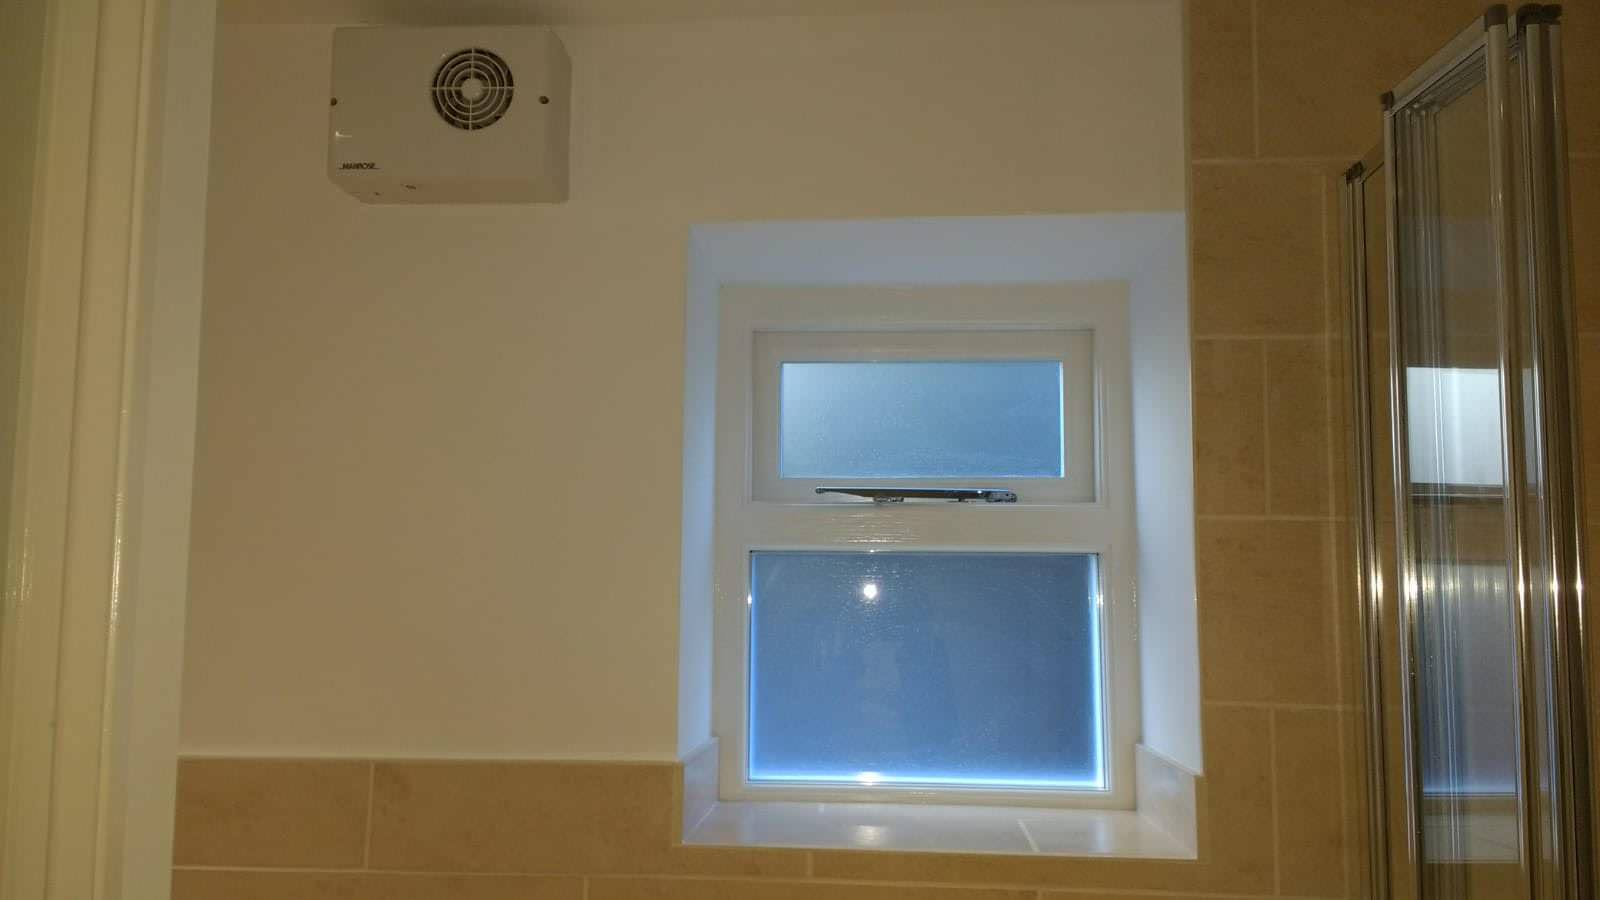 Window Aperture and Shower